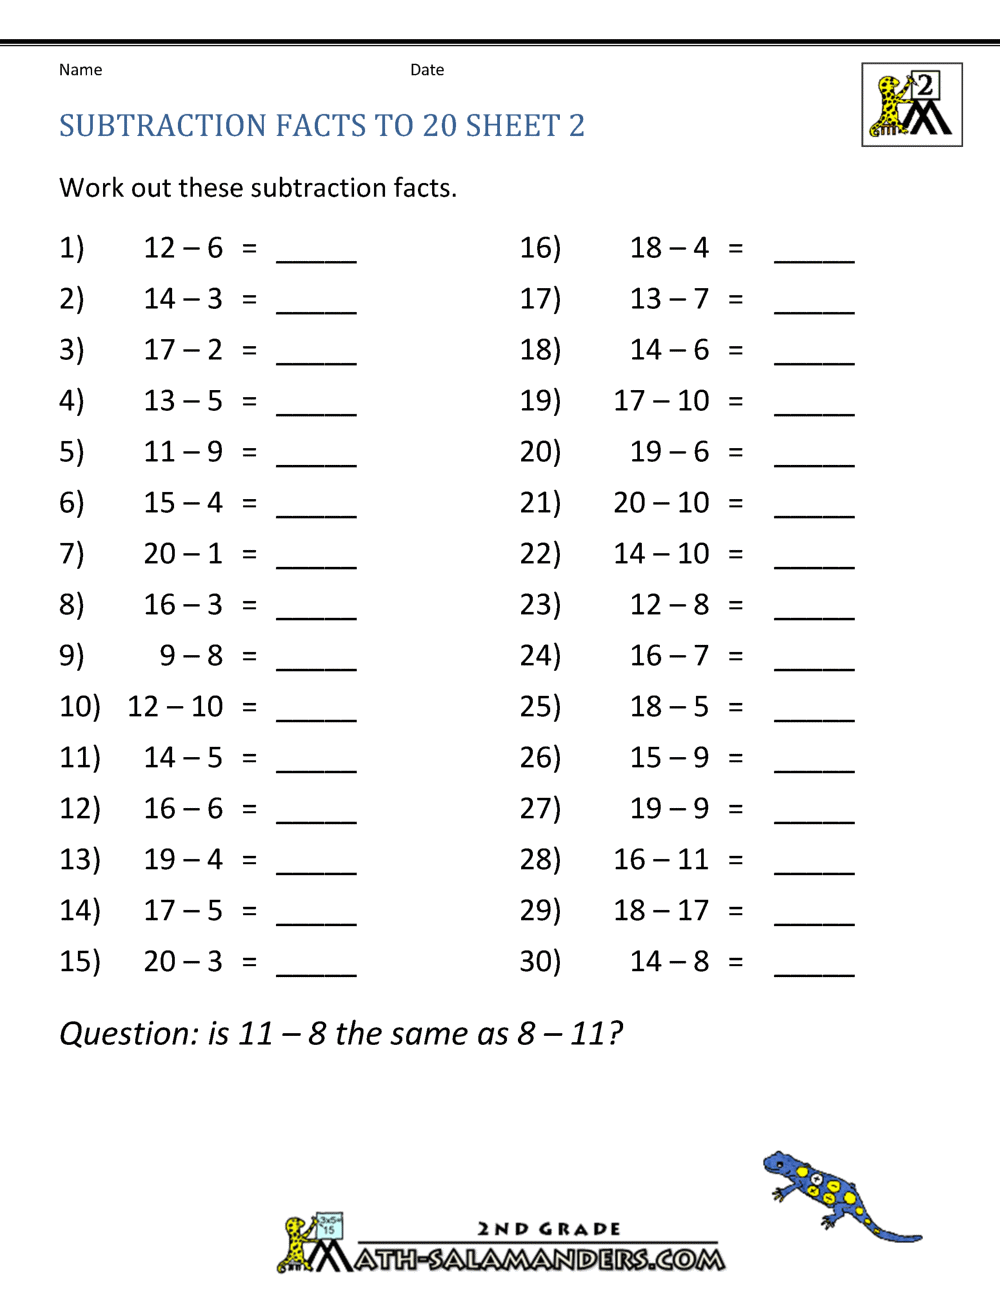 Subtraction From 20 Worksheets Printable Calendar Blank